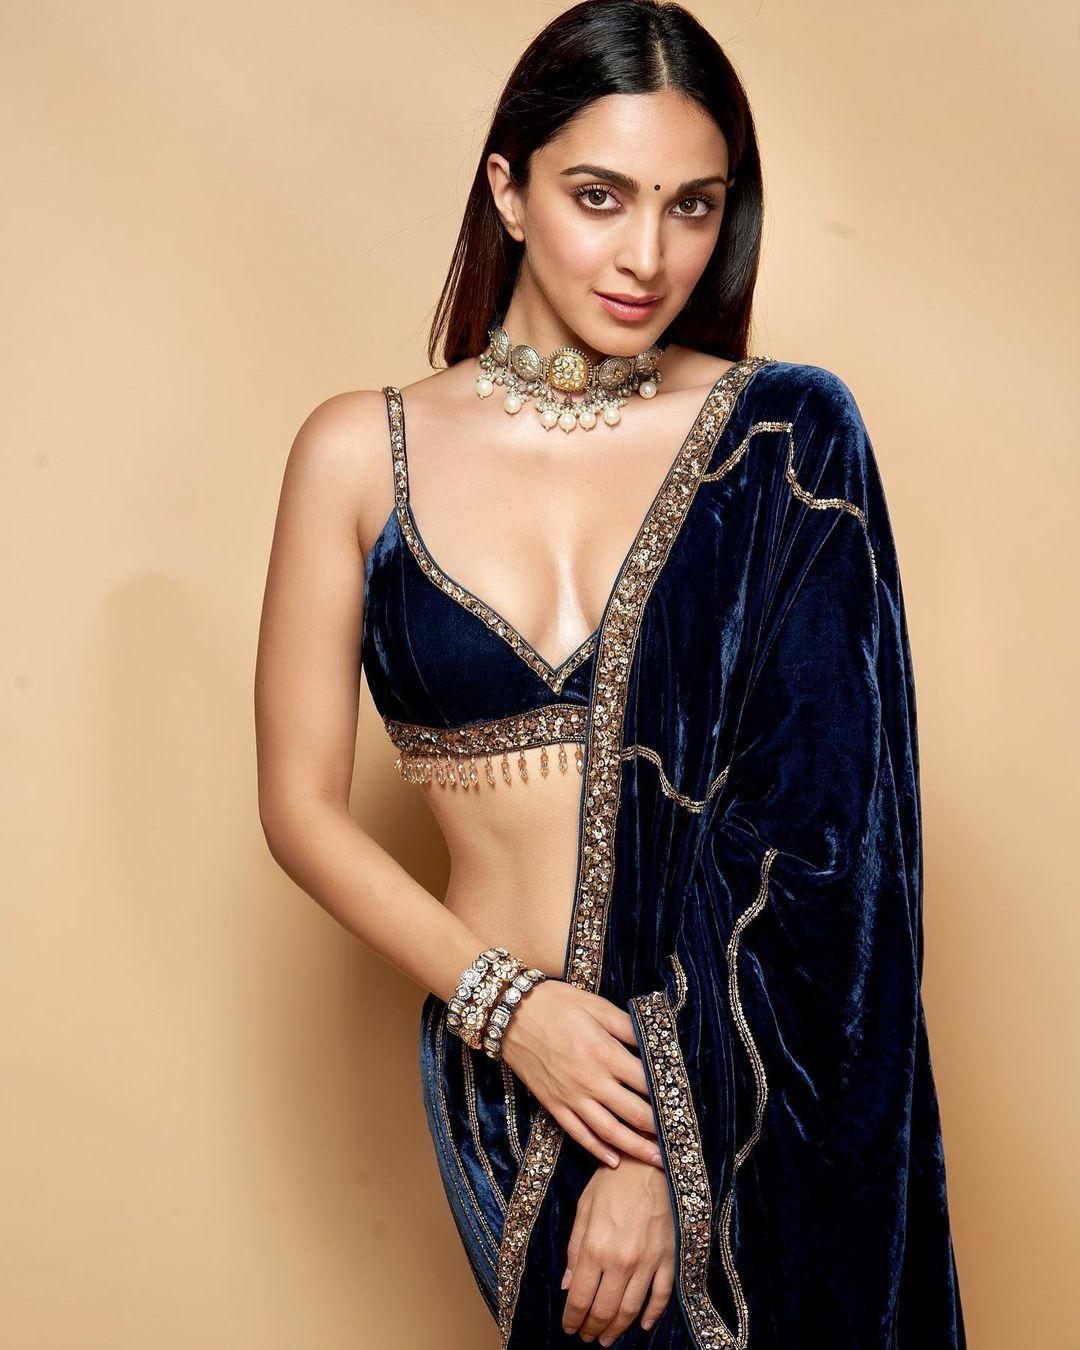 Kiara Advani's stunning blue lehenga for Navratri is a fashion sensation. The rich blue color and intricate embroidery make it a standout choice. It strikes a perfect balance between tradition and modern style, making it an ideal pick for the festive season. Kiara's ensemble sets a trend that's perfect for celebrating Navratri with style and elegance.